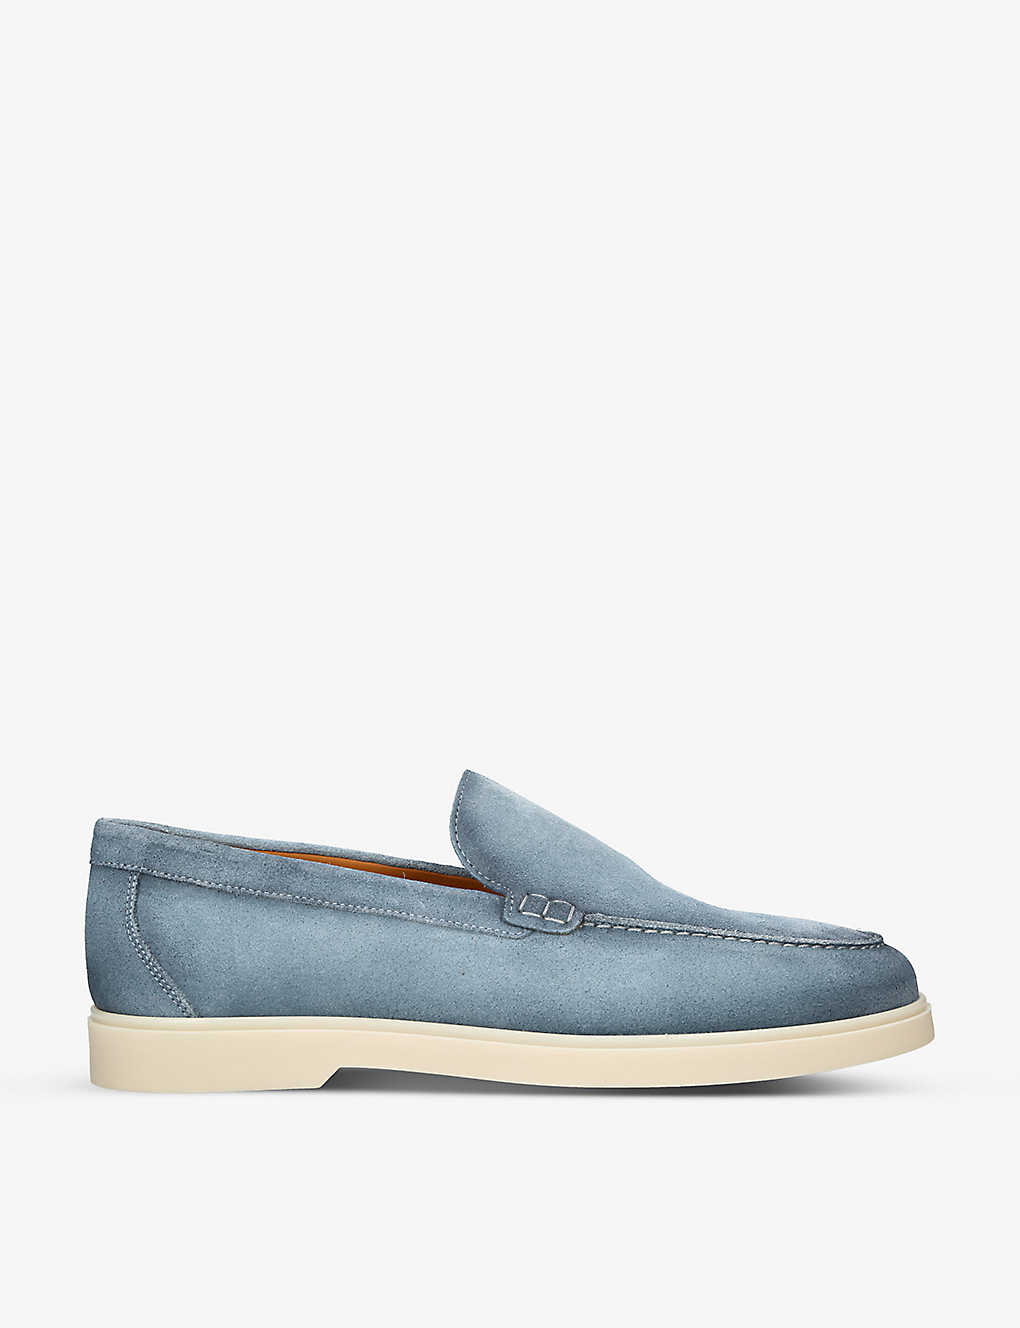 Magnanni Womens Blue Paraiso Slip-on Suede Loafers